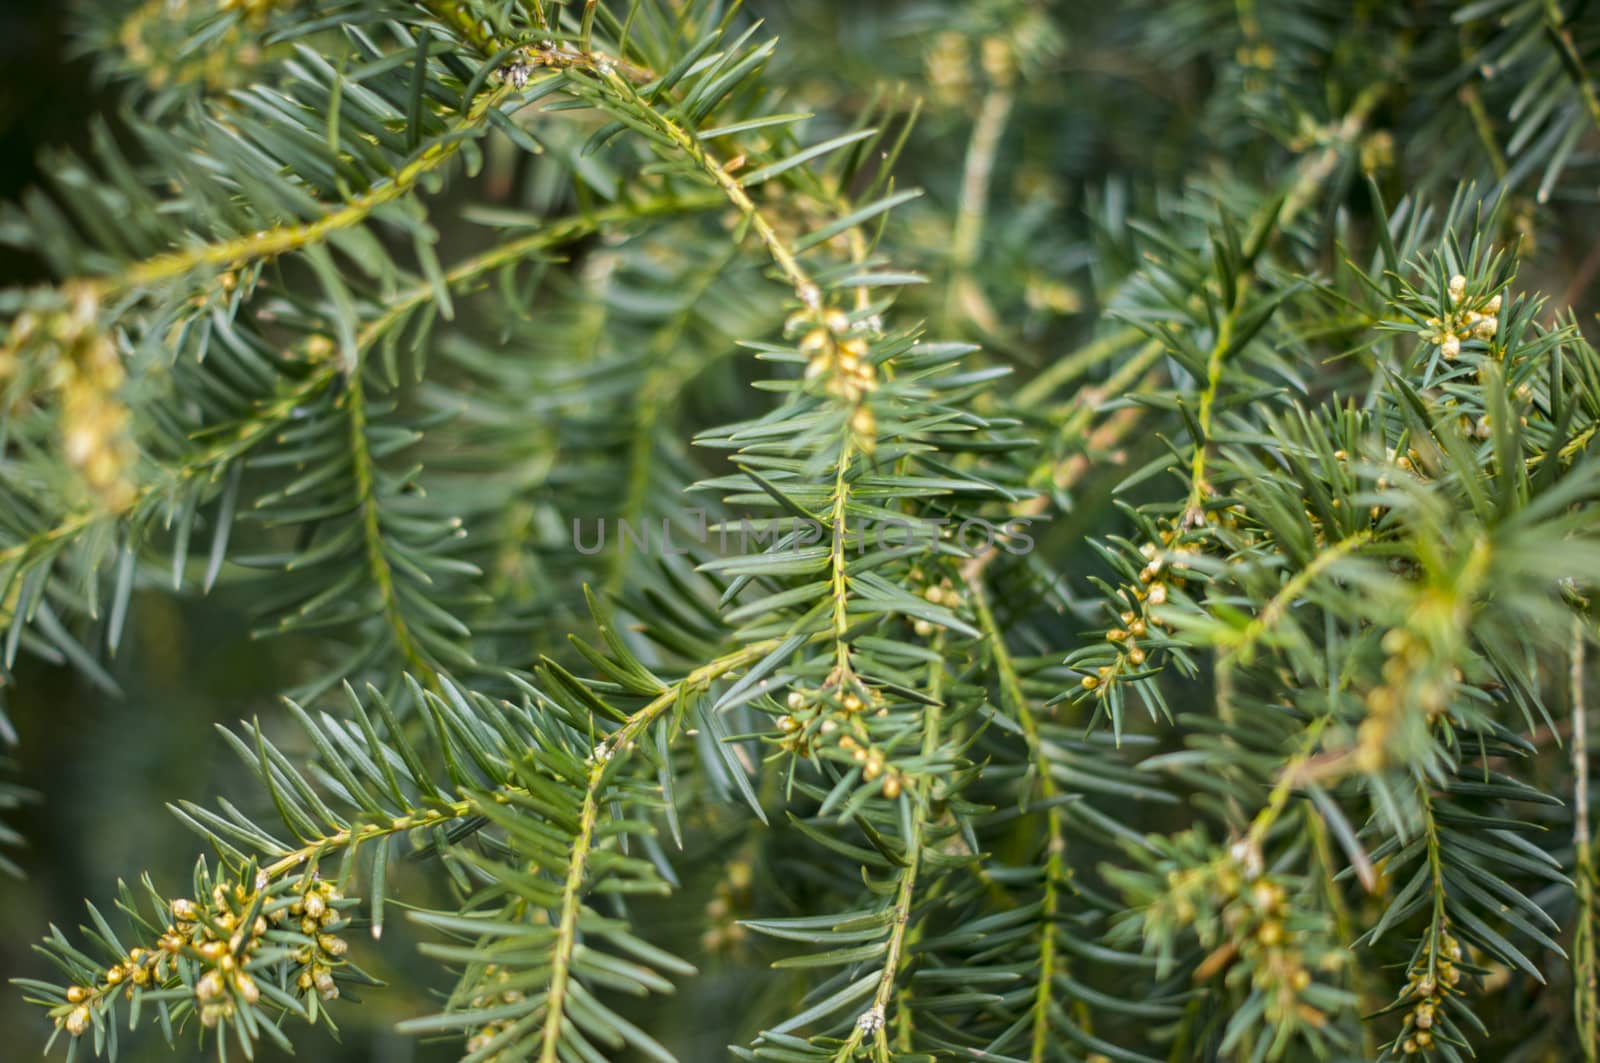 Spiky juniper tree in Spring. For your commercial and editorial use.